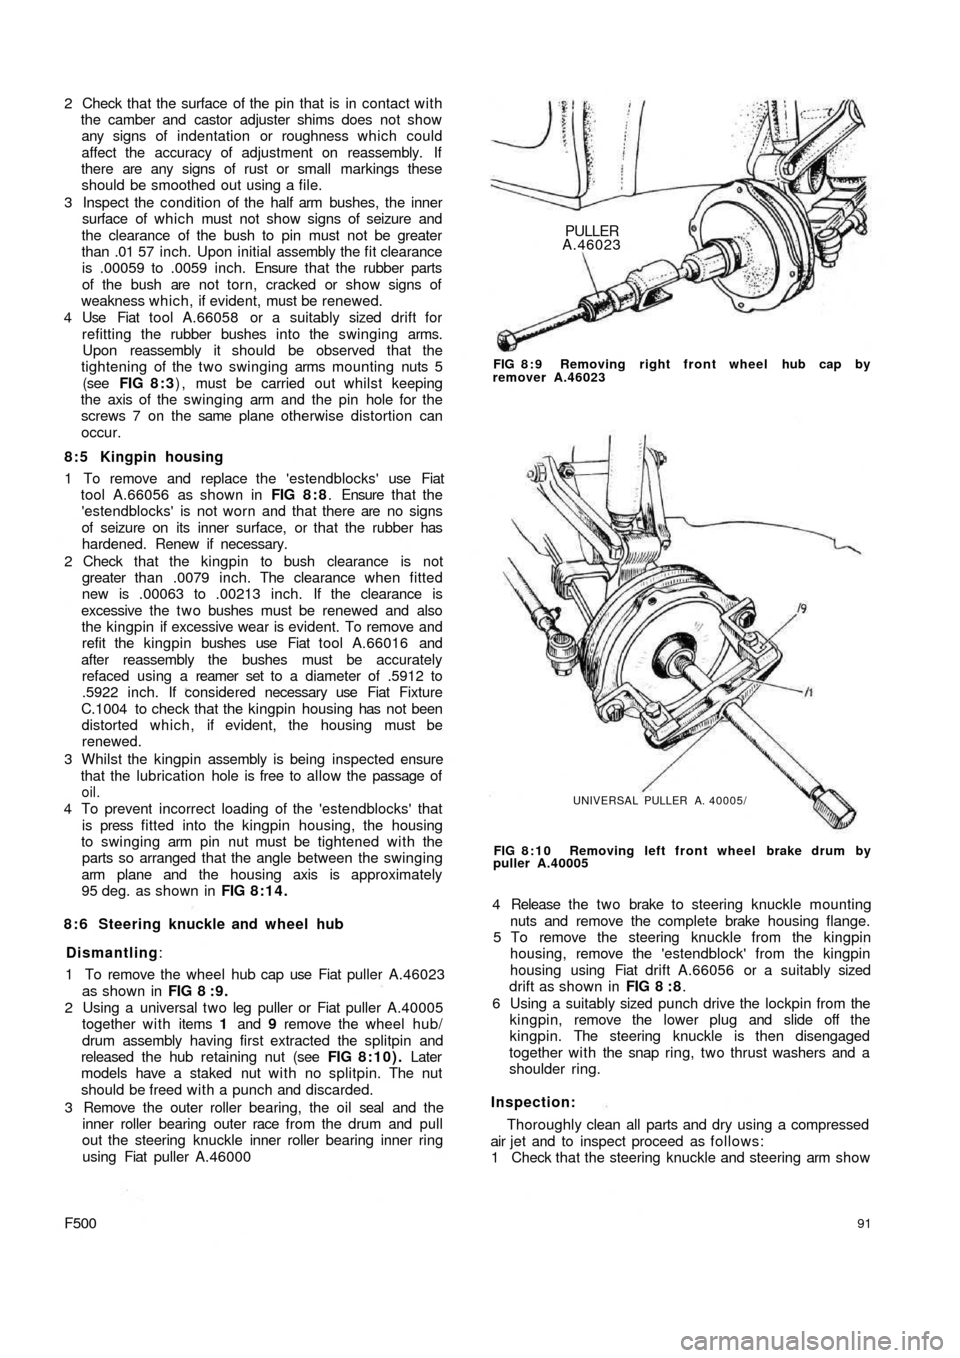 FIAT 500 1971 1.G Workshop Manual 2  Check that the surface of the pin that is in contact with
the camber and castor adjuster shims does not show
any signs of indentation or roughness which could
affect the  accuracy of adjustment on 